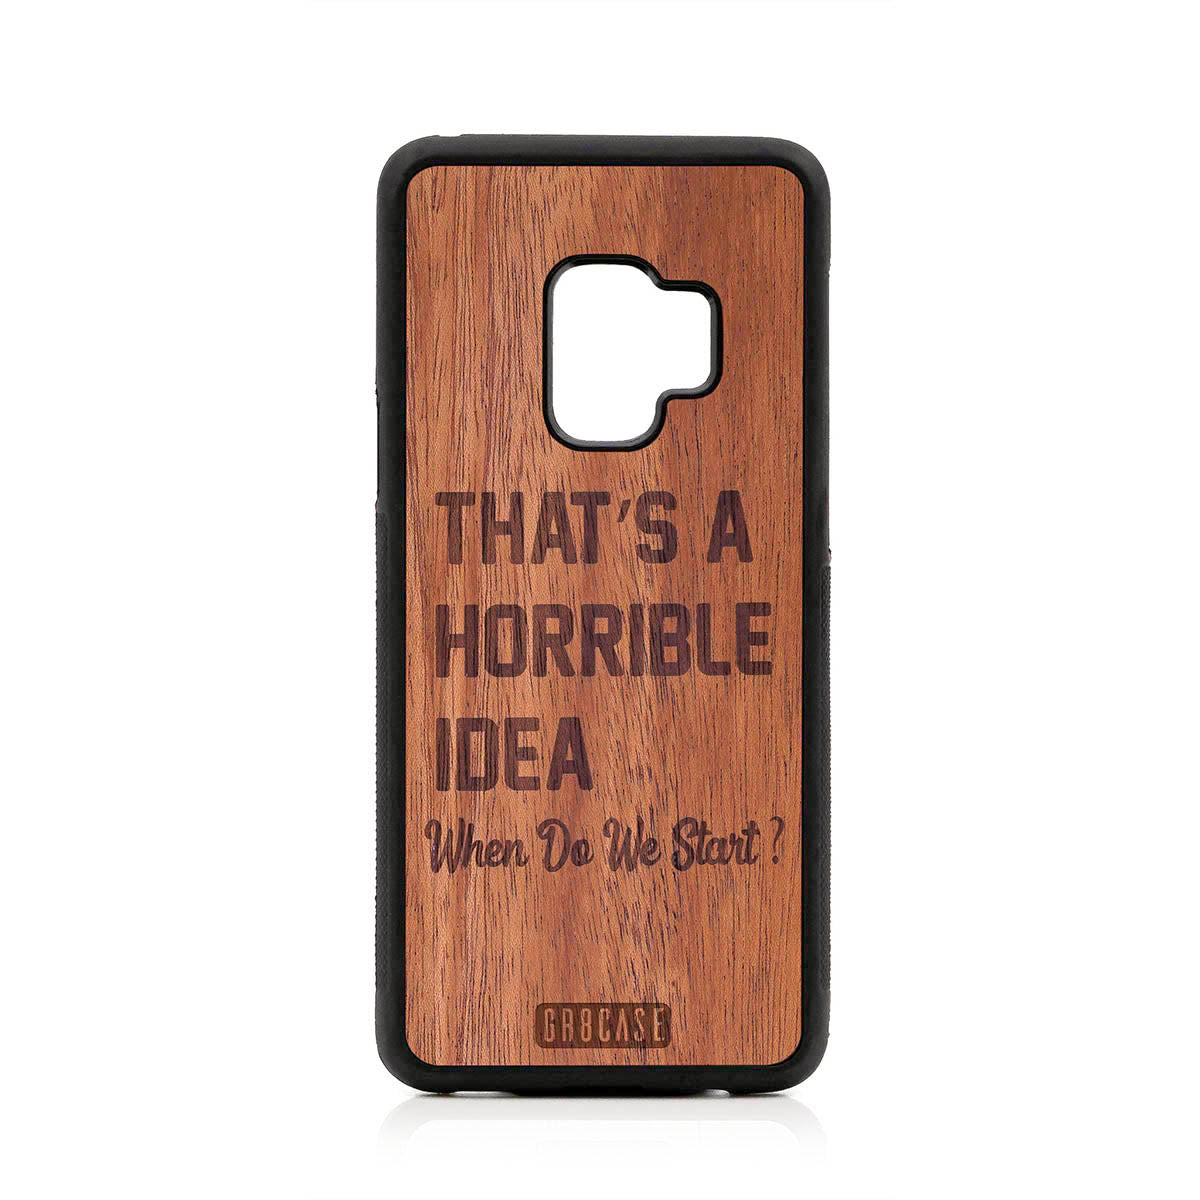 That's A Horrible Idea When Do We Start? Design Wood Case For Samsung Galaxy S9